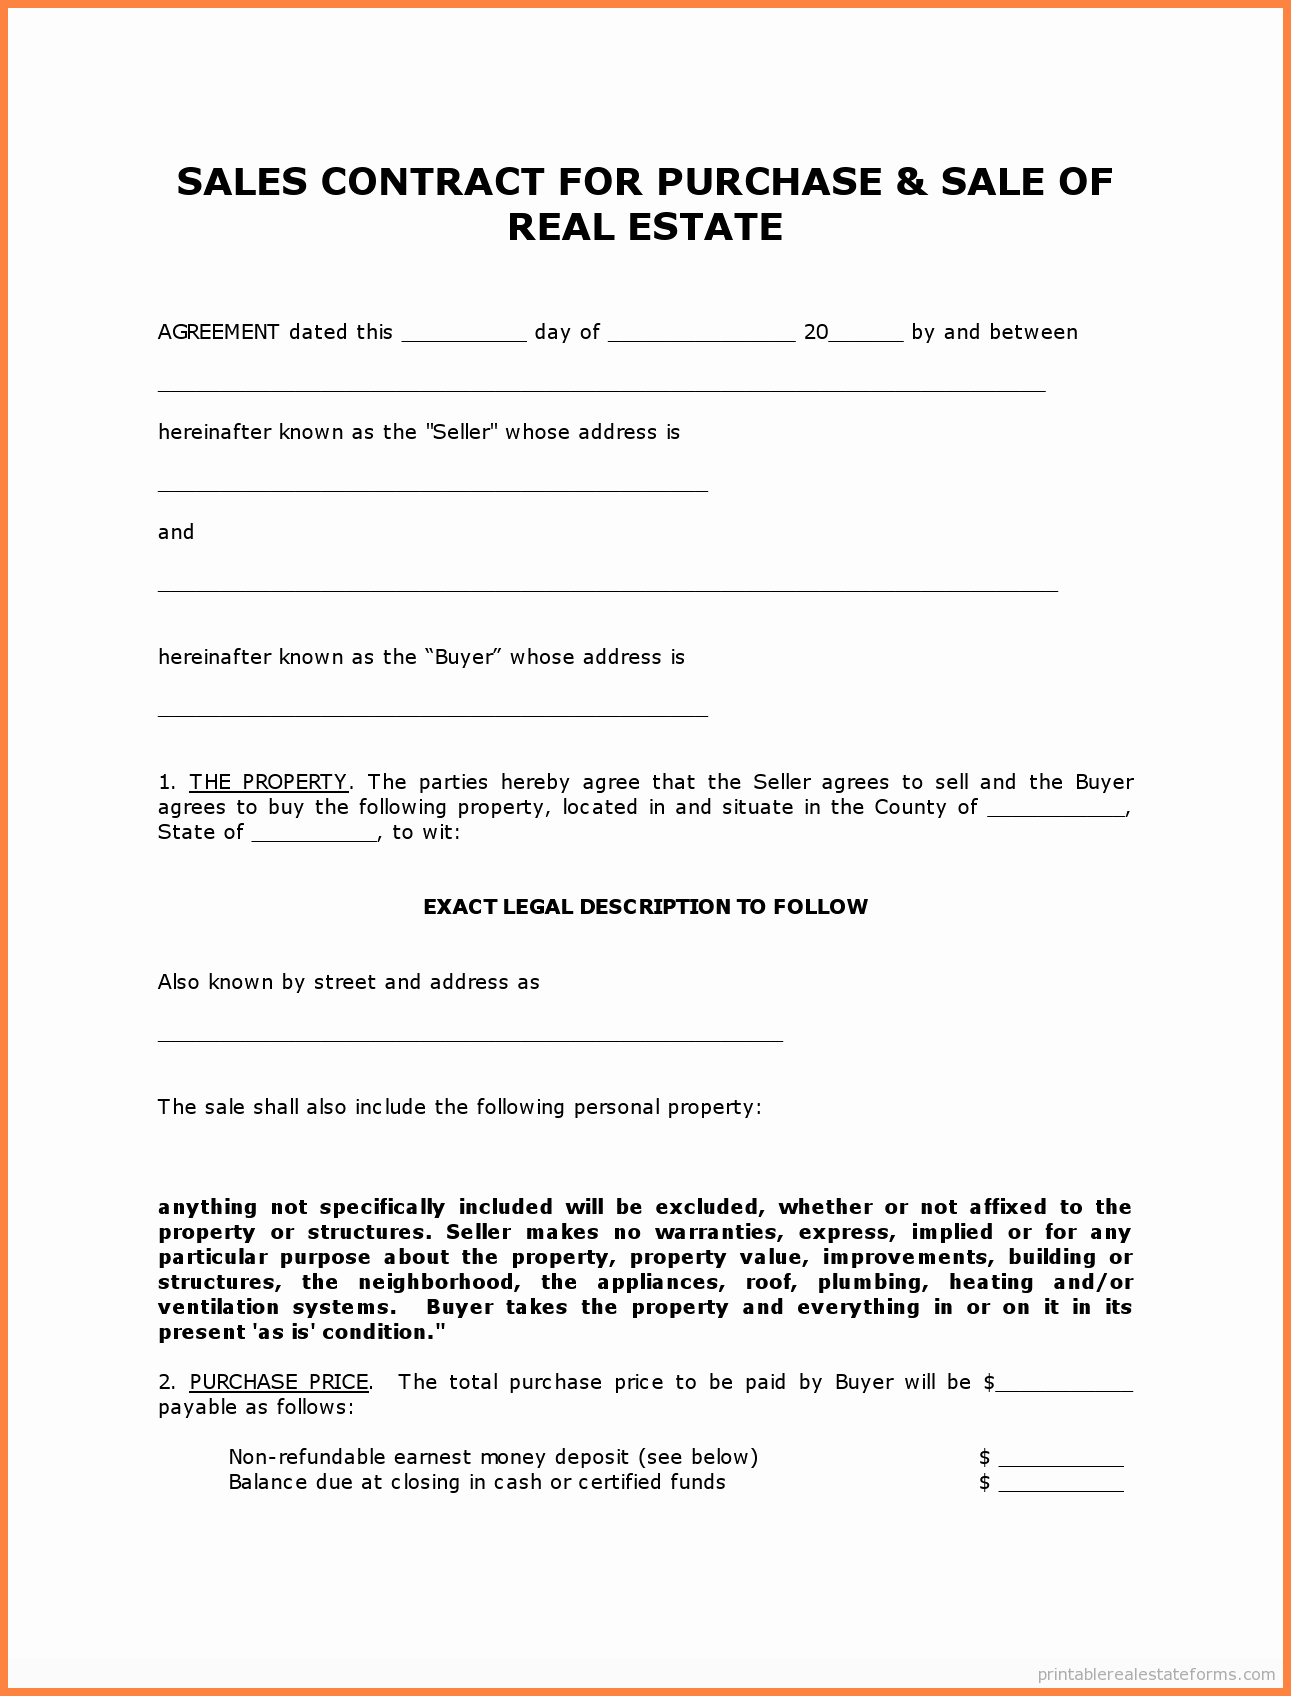 Simple Home Purchase Agreement Unique 4 for Sale by Owner Purchase Agreement form